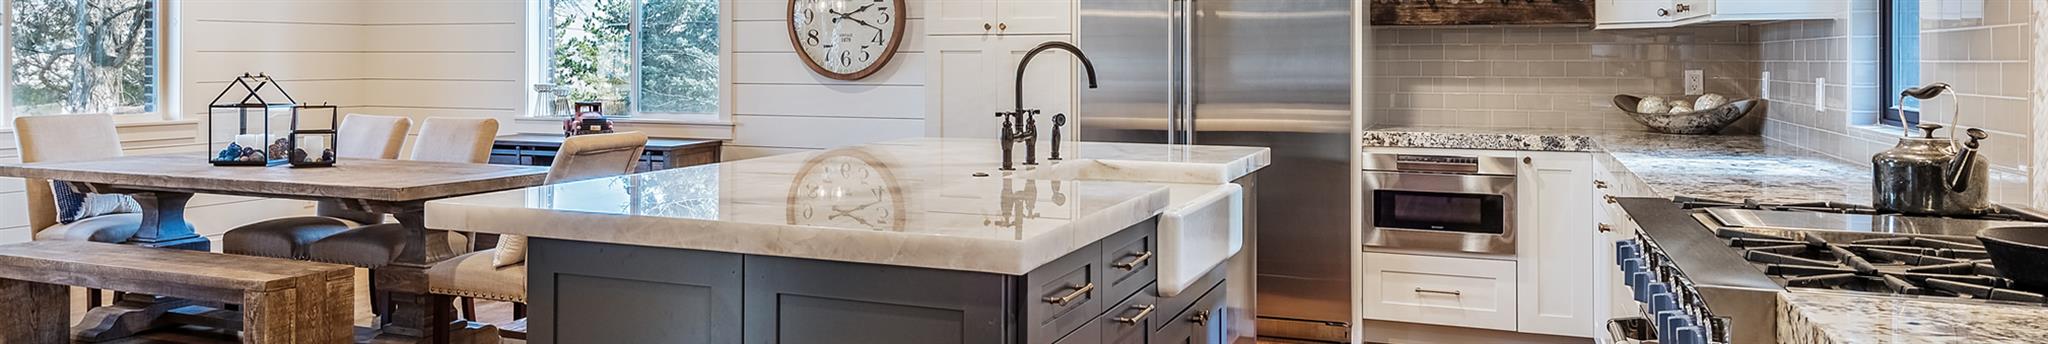 How Much Do Quartz Countertops Cost to Install in Denver?